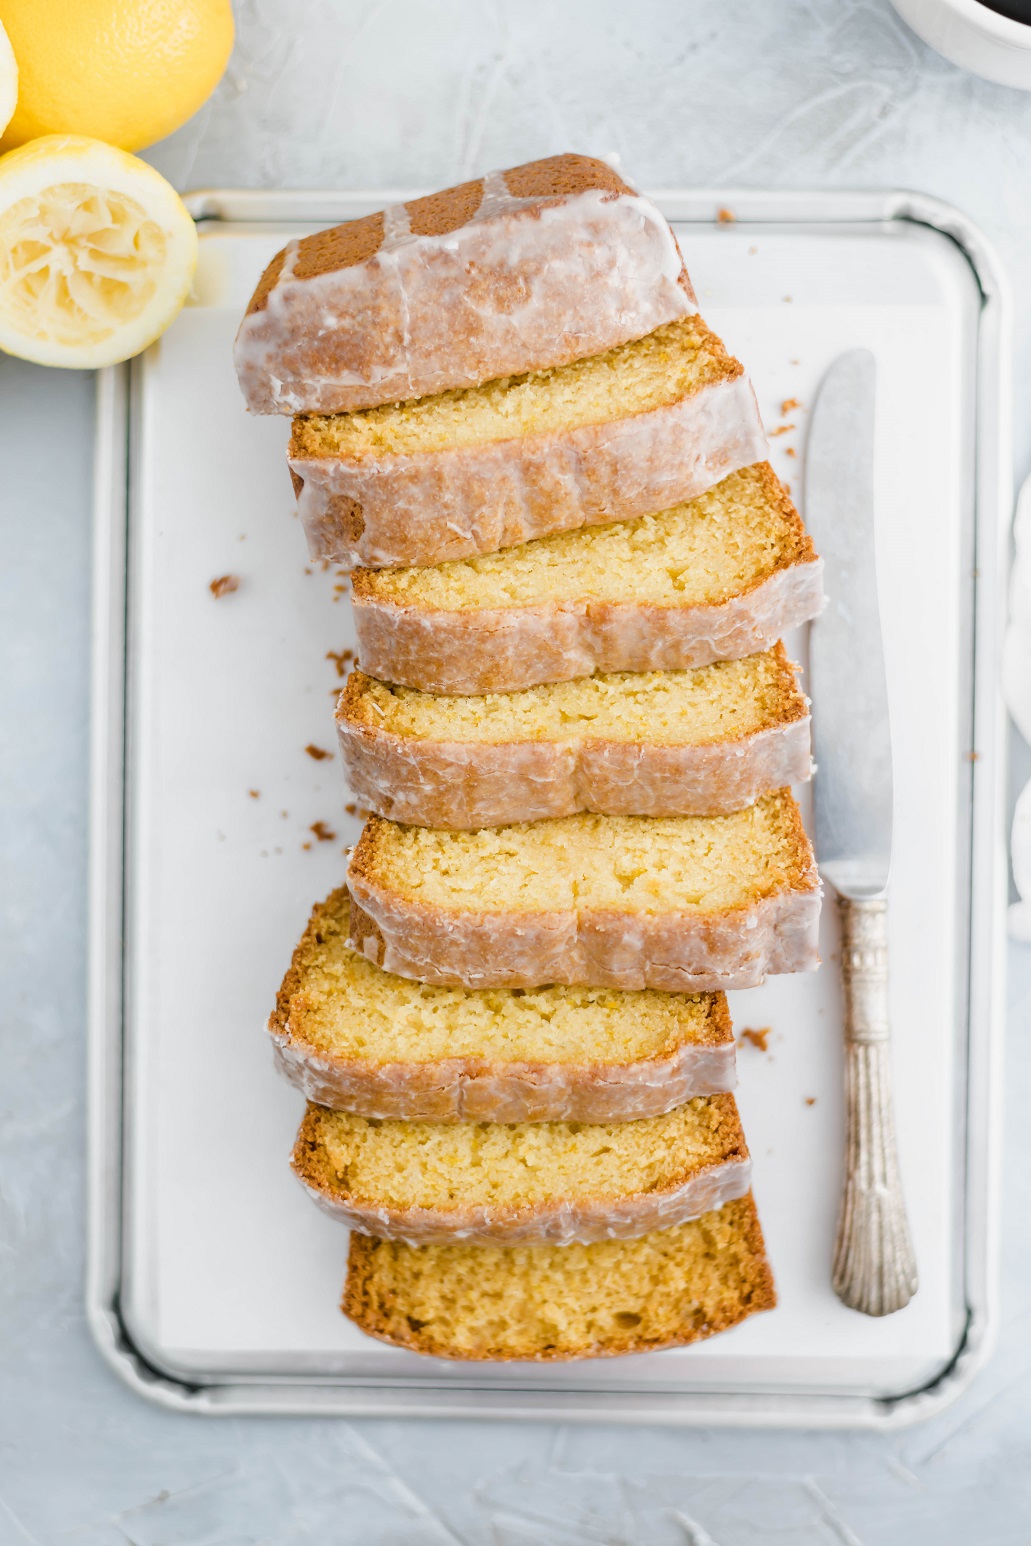 Sliced Starbucks lemon loaf arranged in a slight s shape with a decorative knife to the right and squeeze lemons in the top left corner.